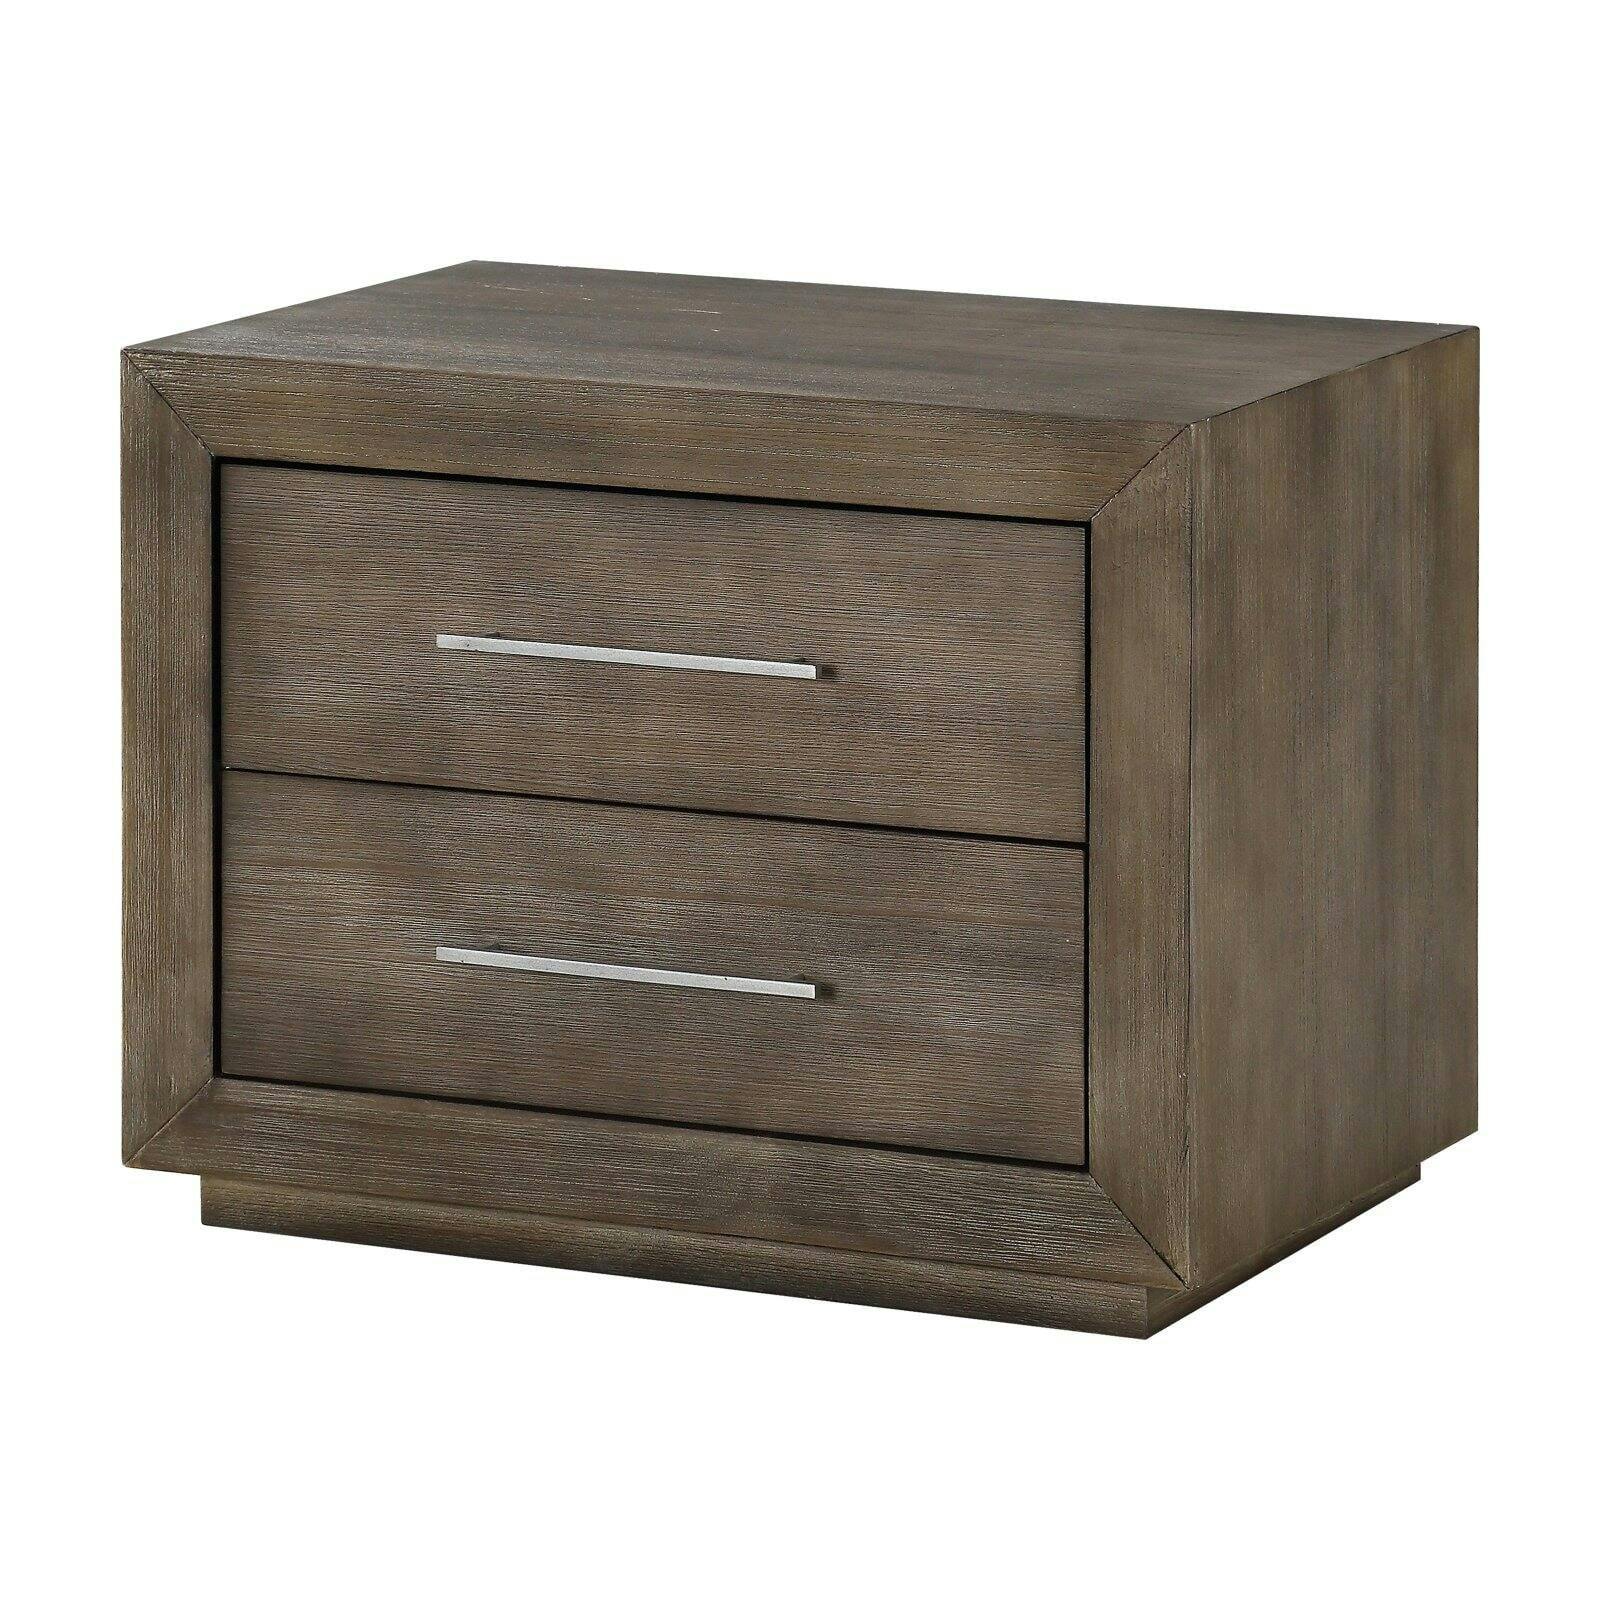 Rustic Dark Pine 2-Drawer Nightstand with USB Charger